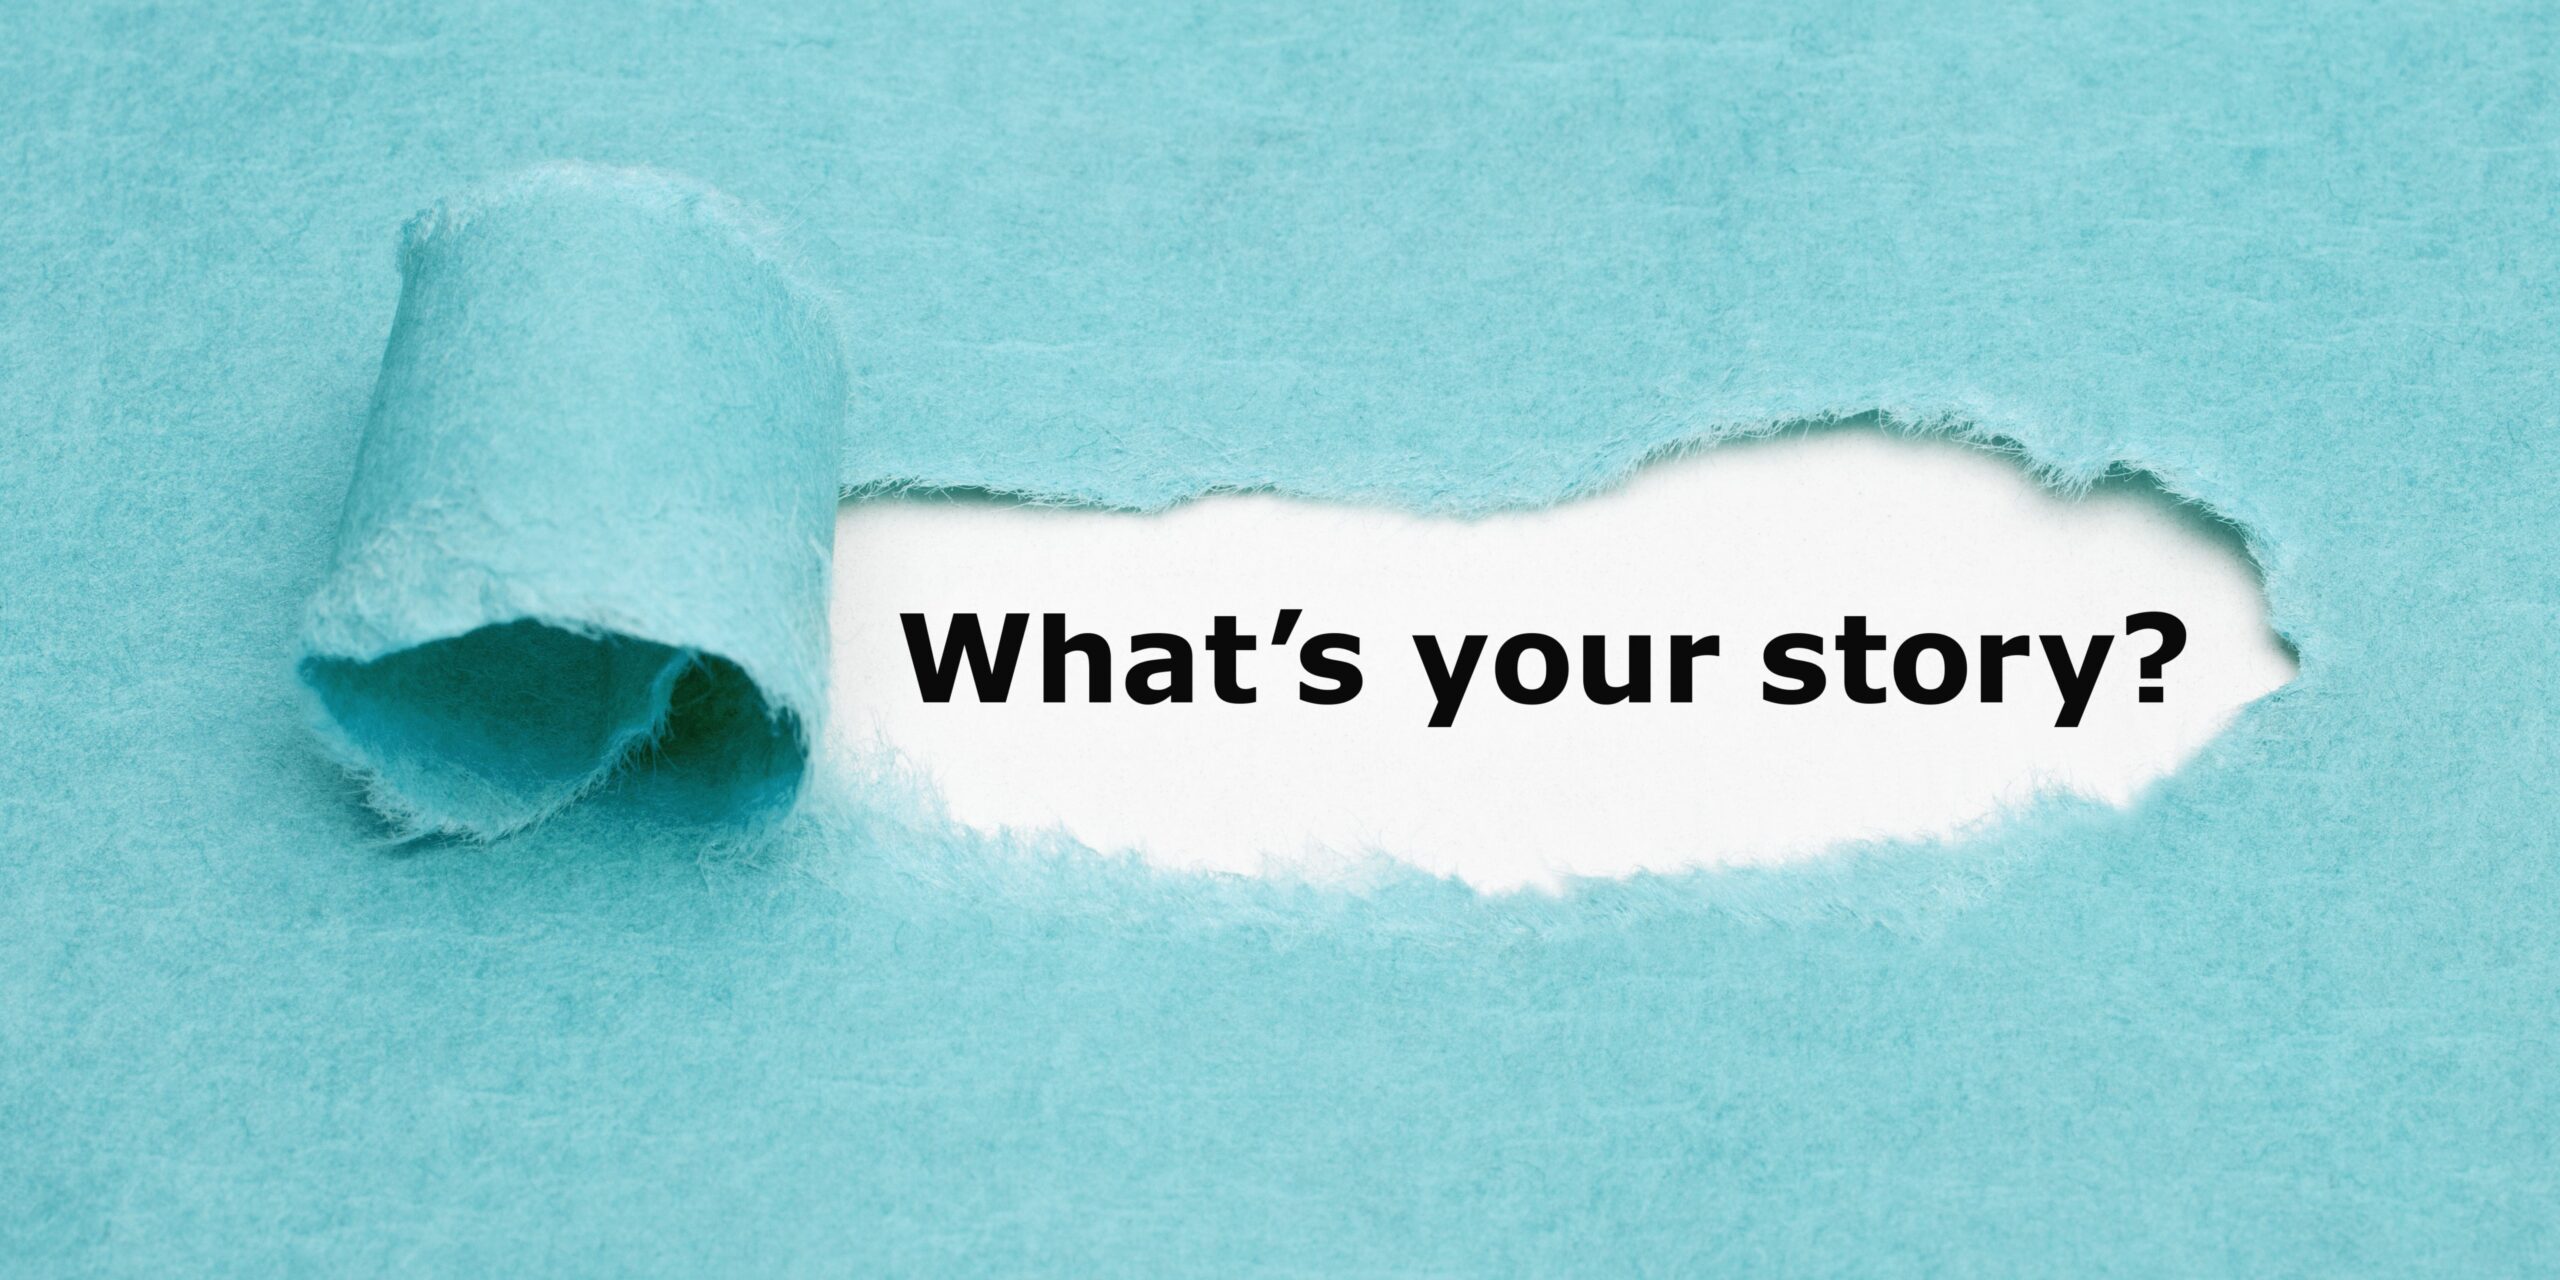 What’s your story? Kevin van Cortenberg